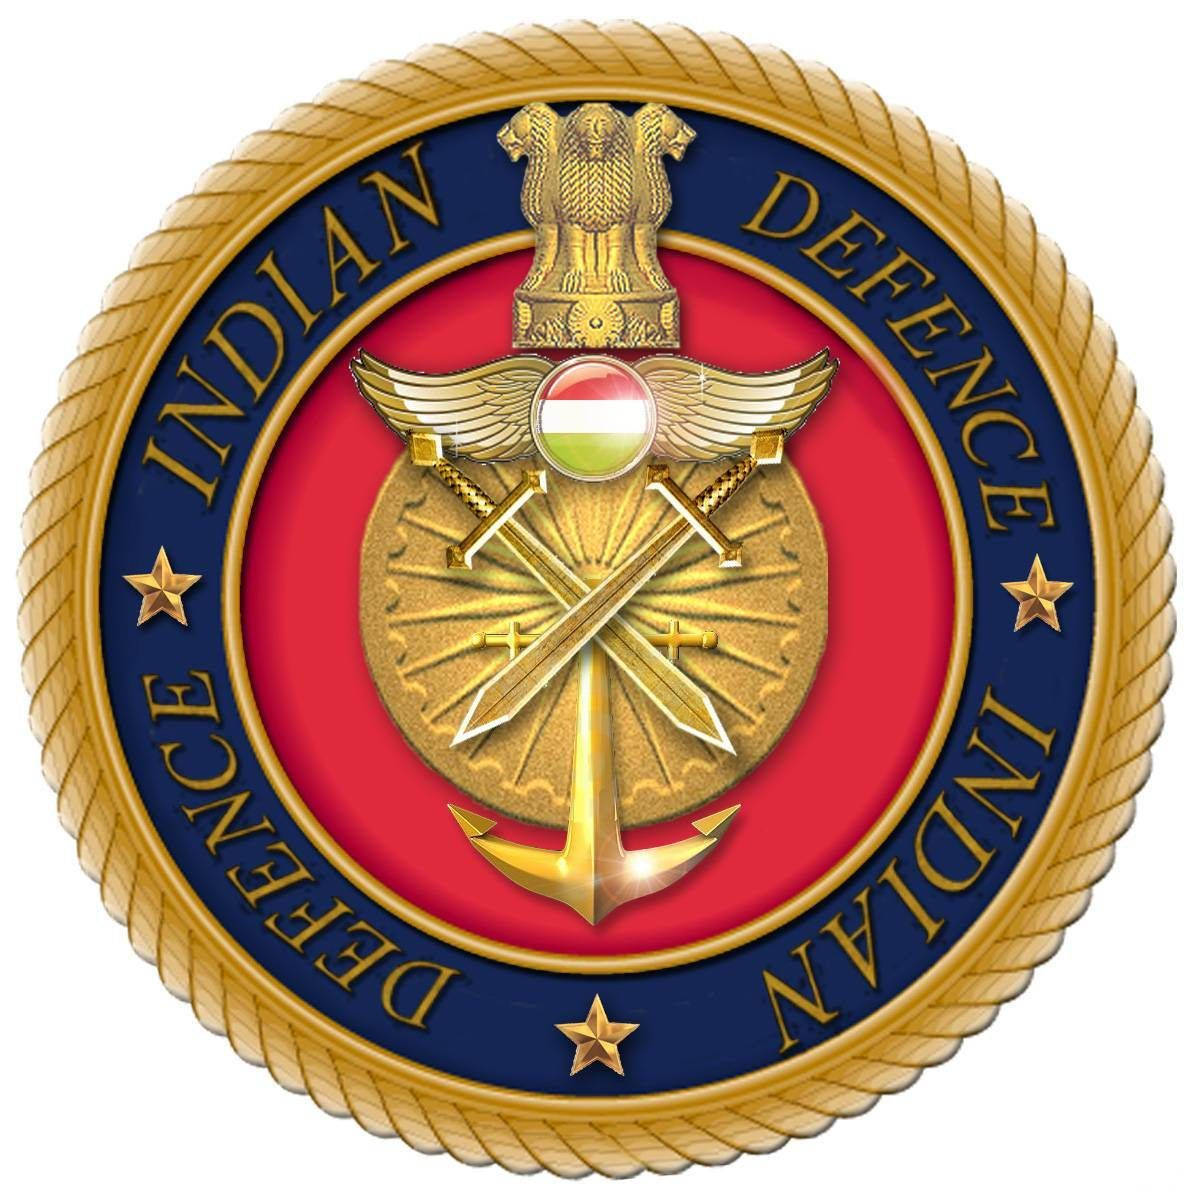 Captivating Power: Indian Army Logo Featuring Two Swords And Anchor Wallpaper